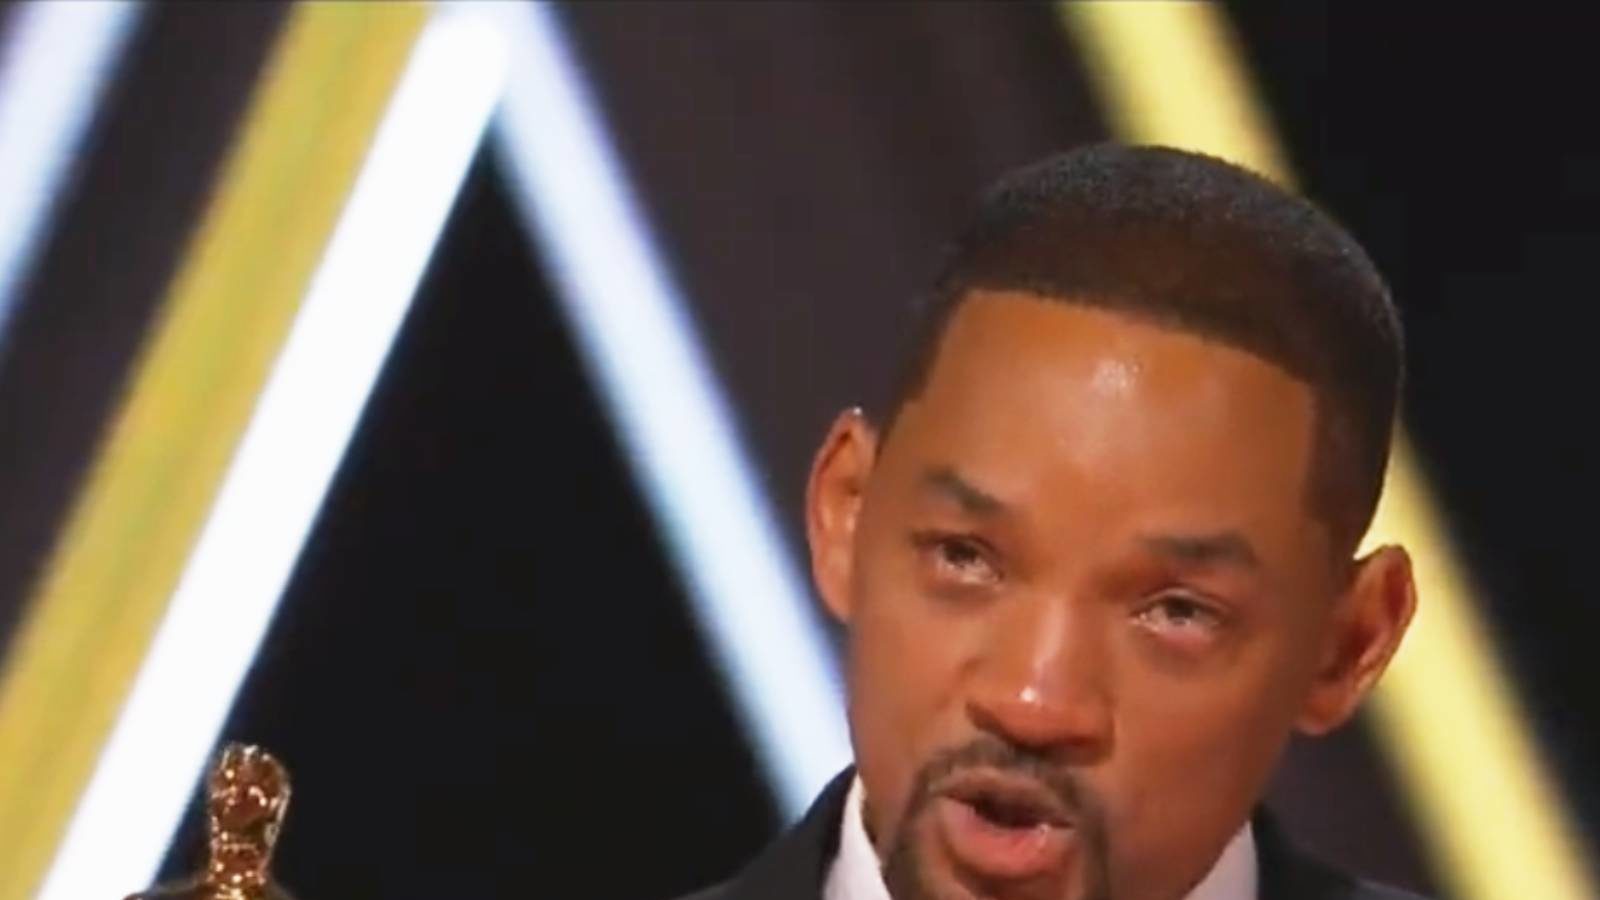 Will Smith resigns from Academy after 'Slap Scandal', Chris Rock again says sorry

